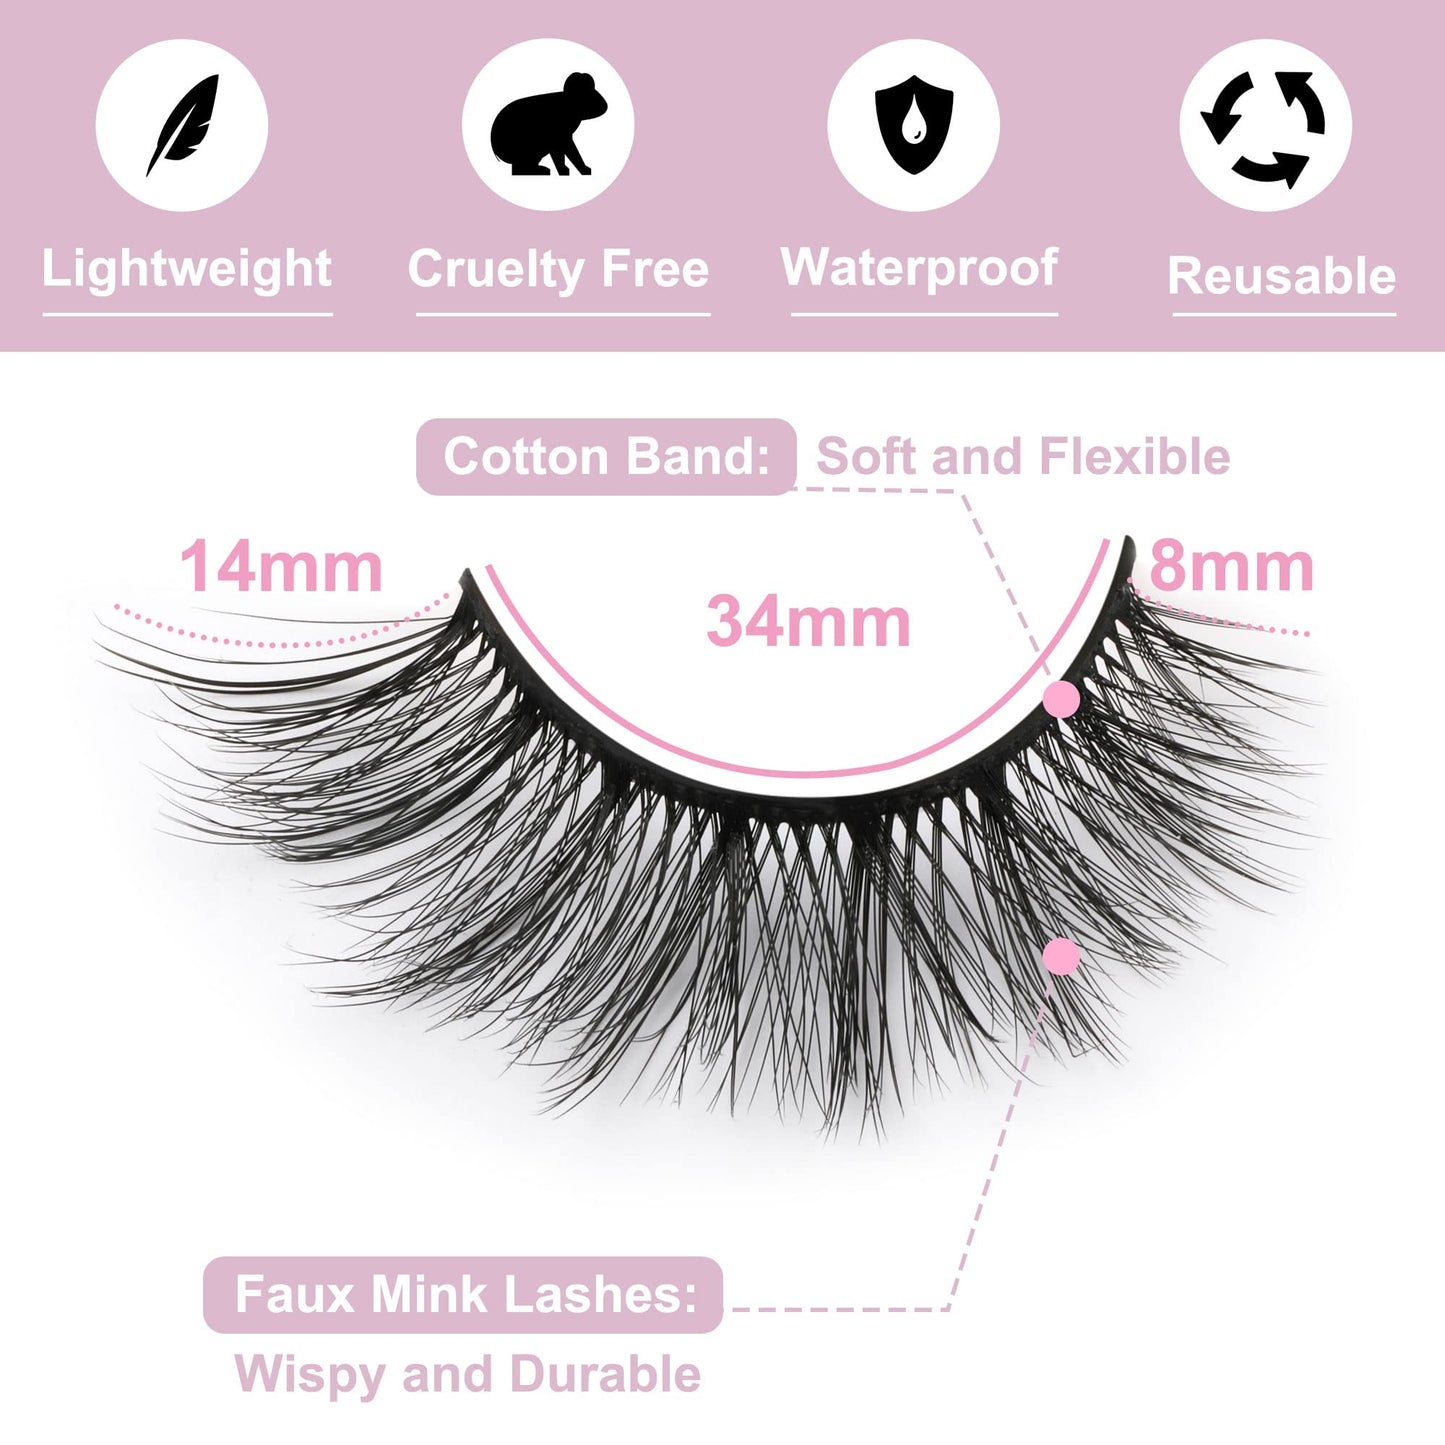 False Eyelashes 14mm Faux 3D Mink Lashes Natural Look Fluffy Cat Eye Wispy Lashes Pack by Kiromiro, 14 Pairs